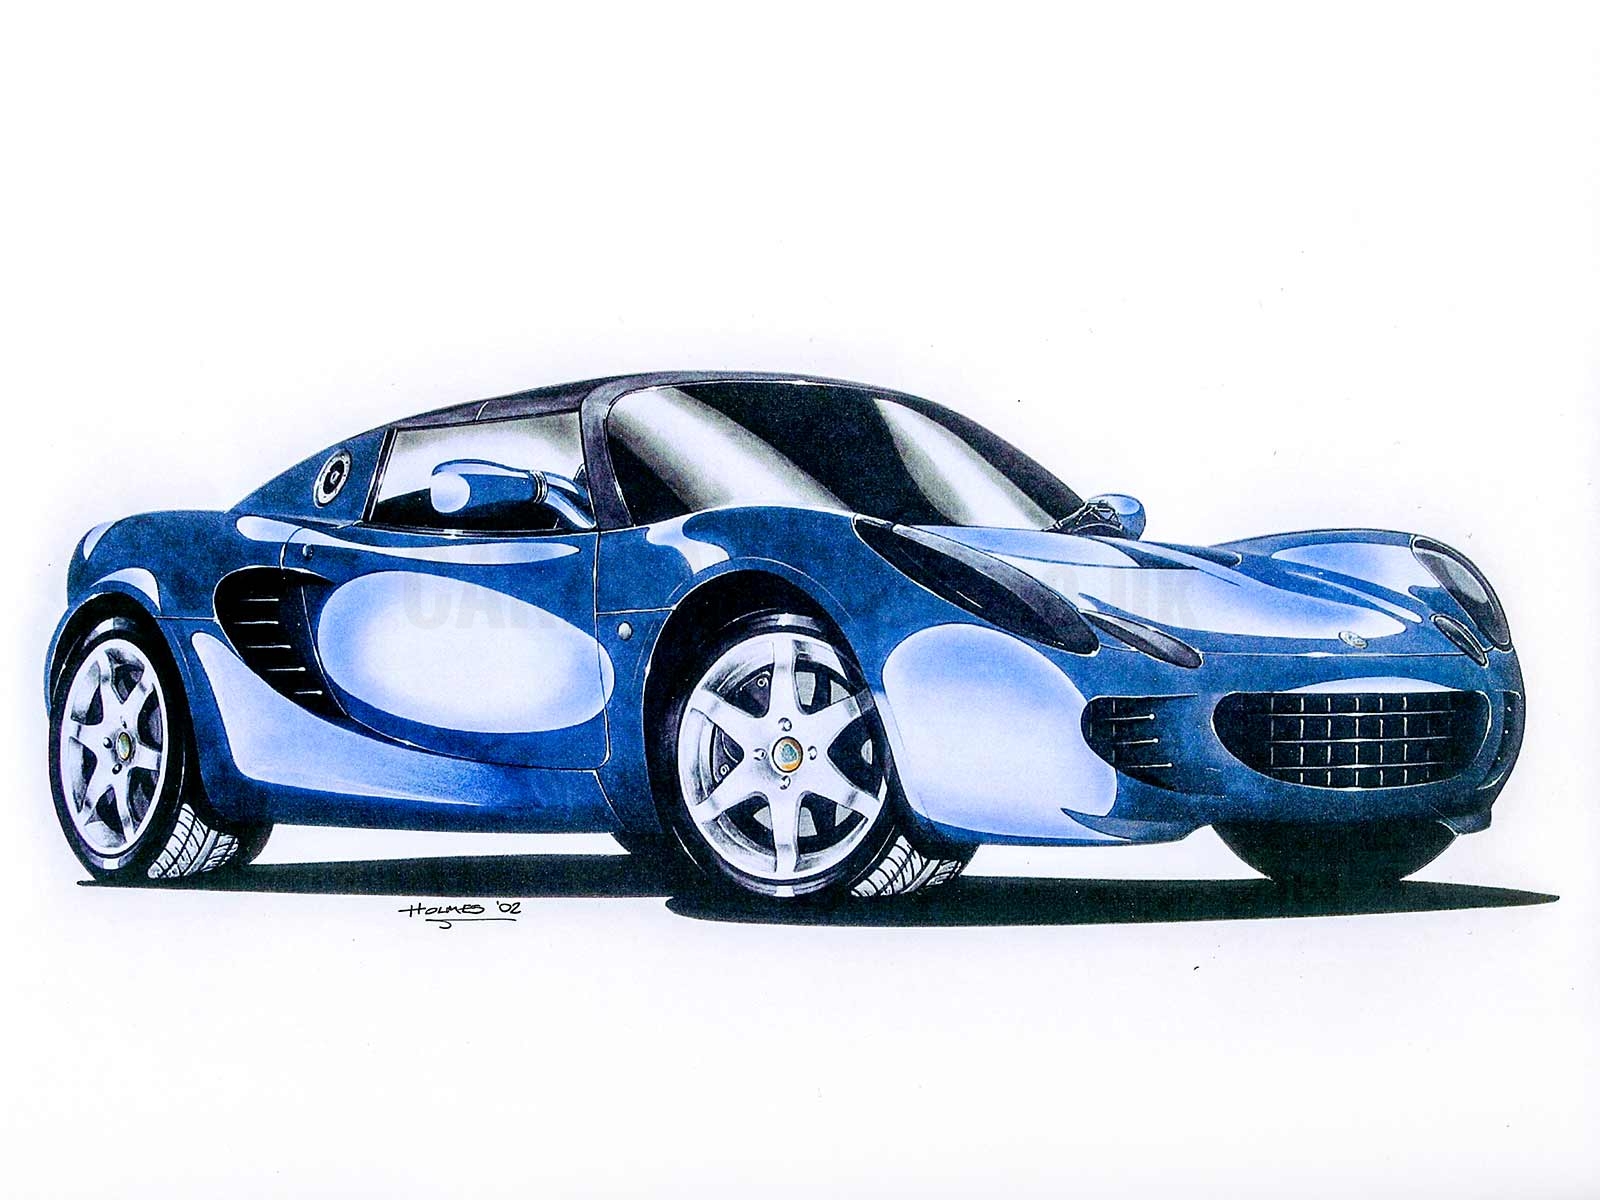 New How To Draw Car Design Sketches Pdf with simple drawing